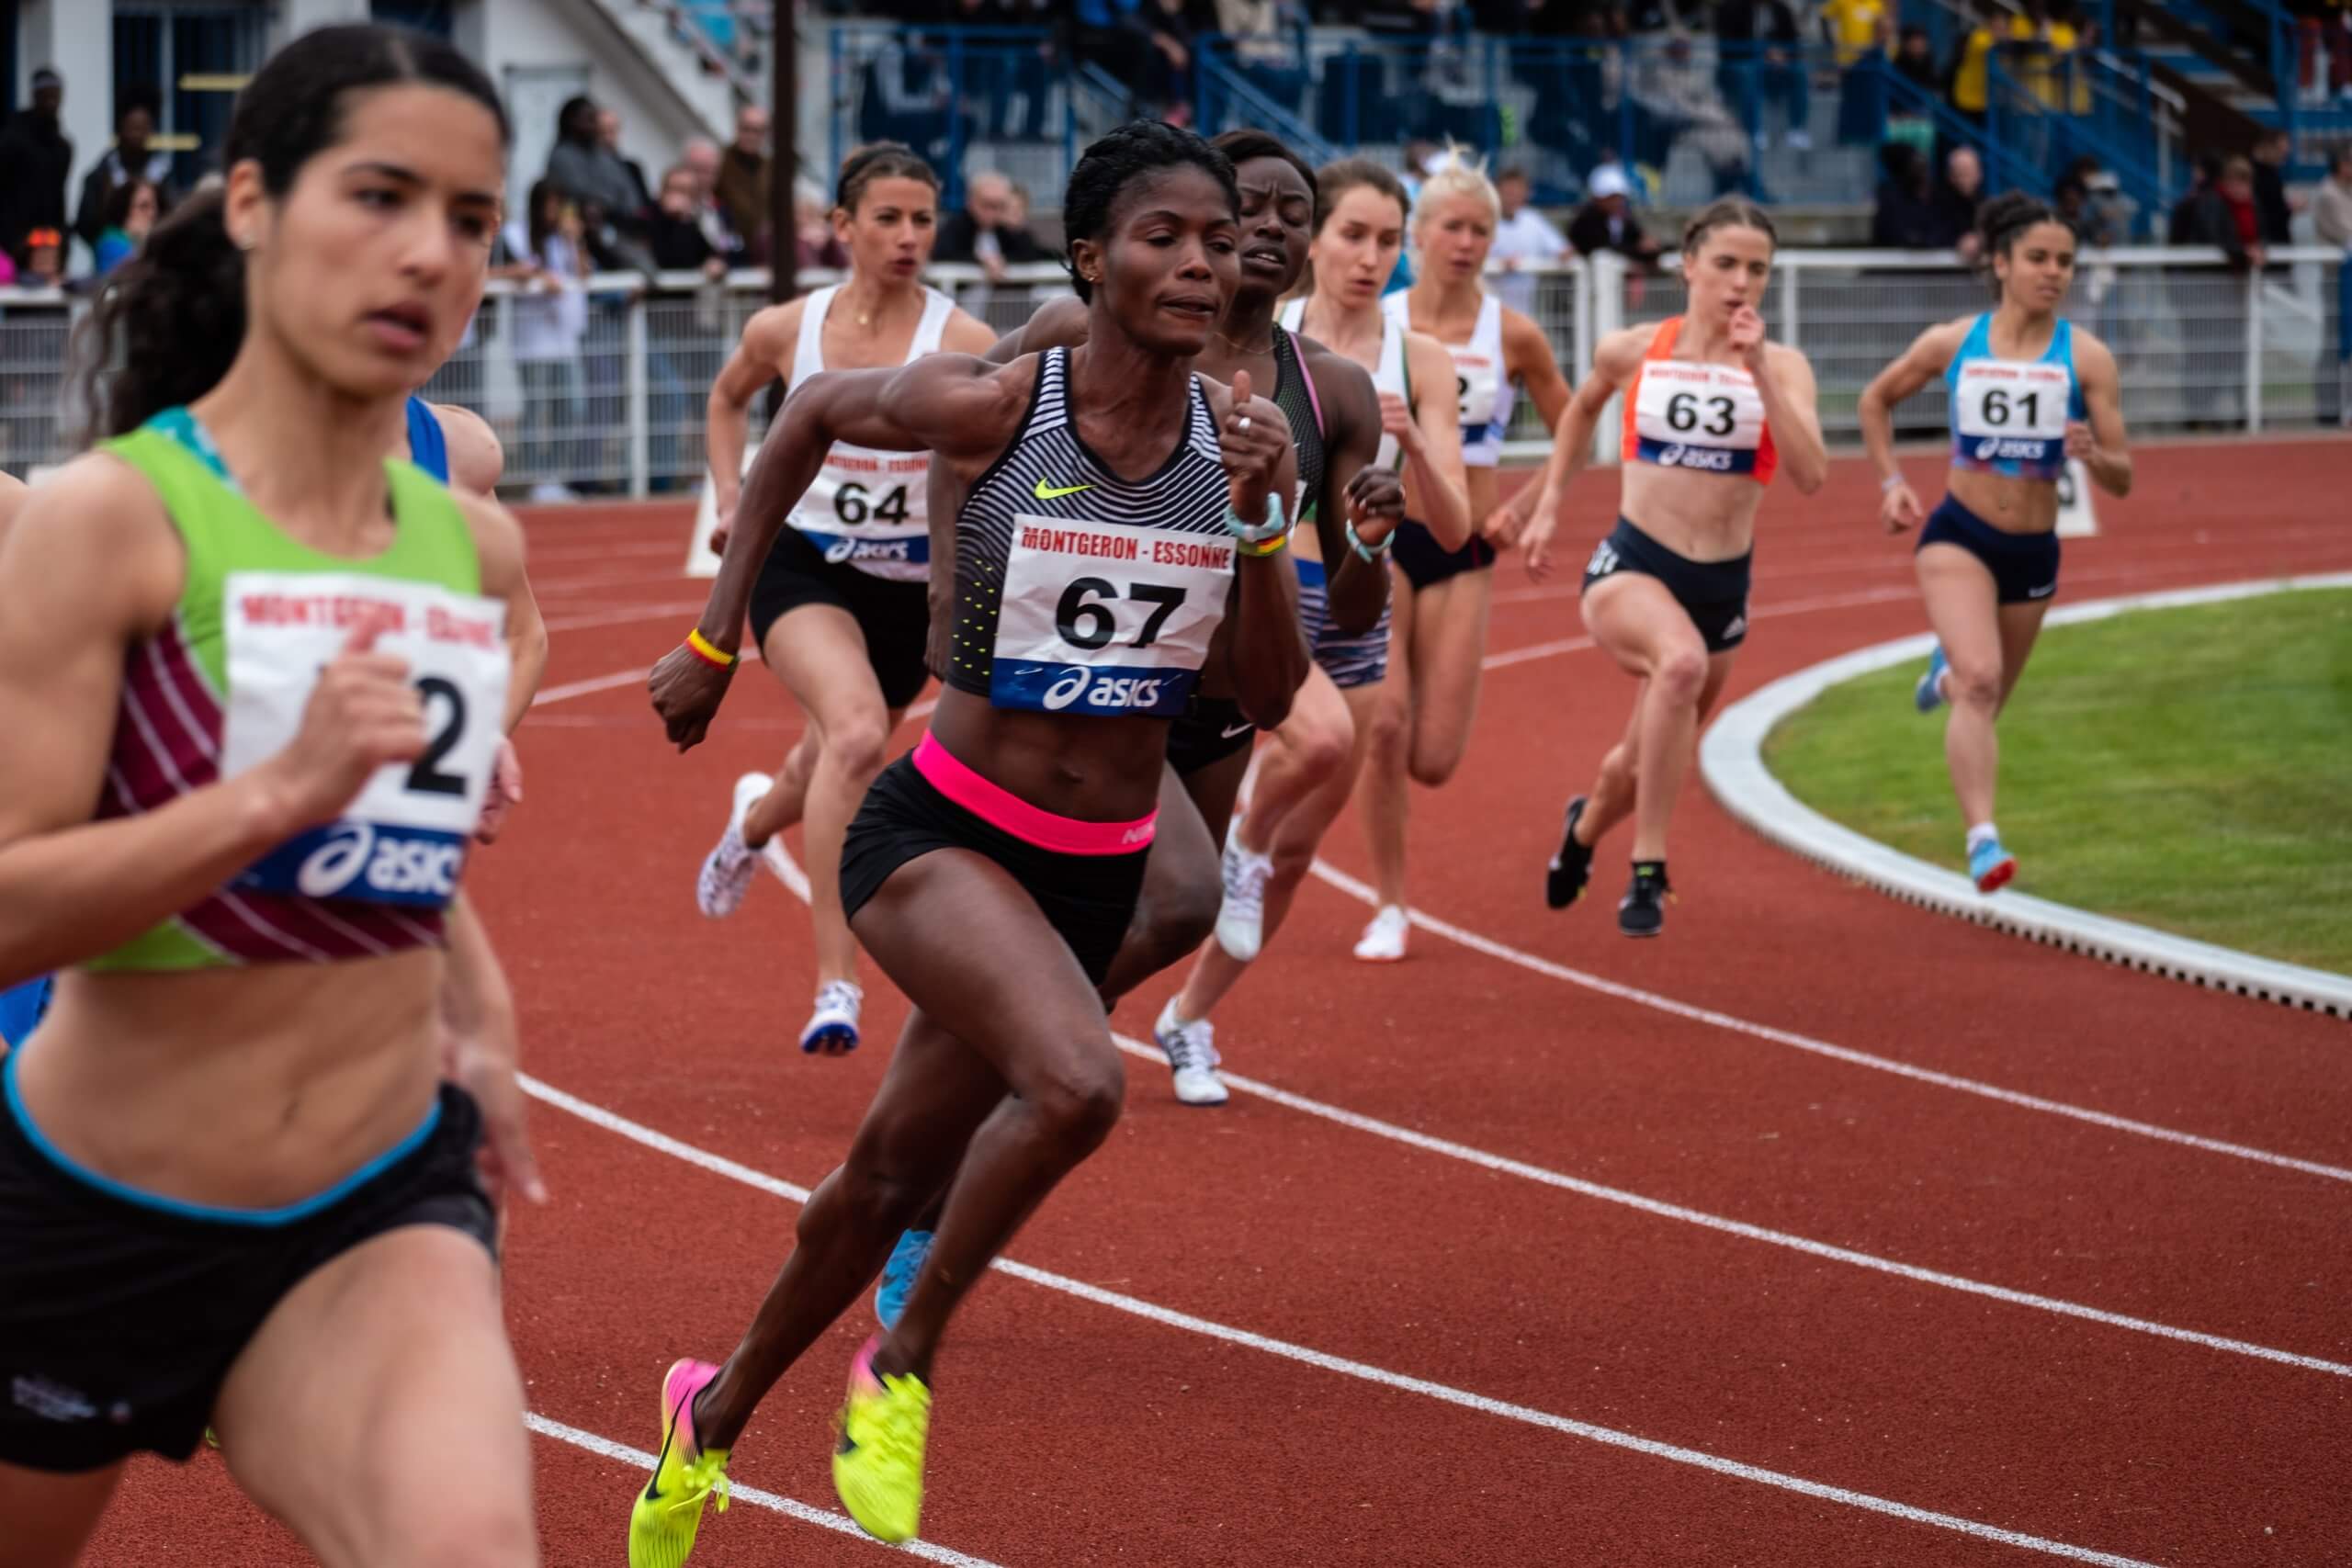 Women running in track and field race